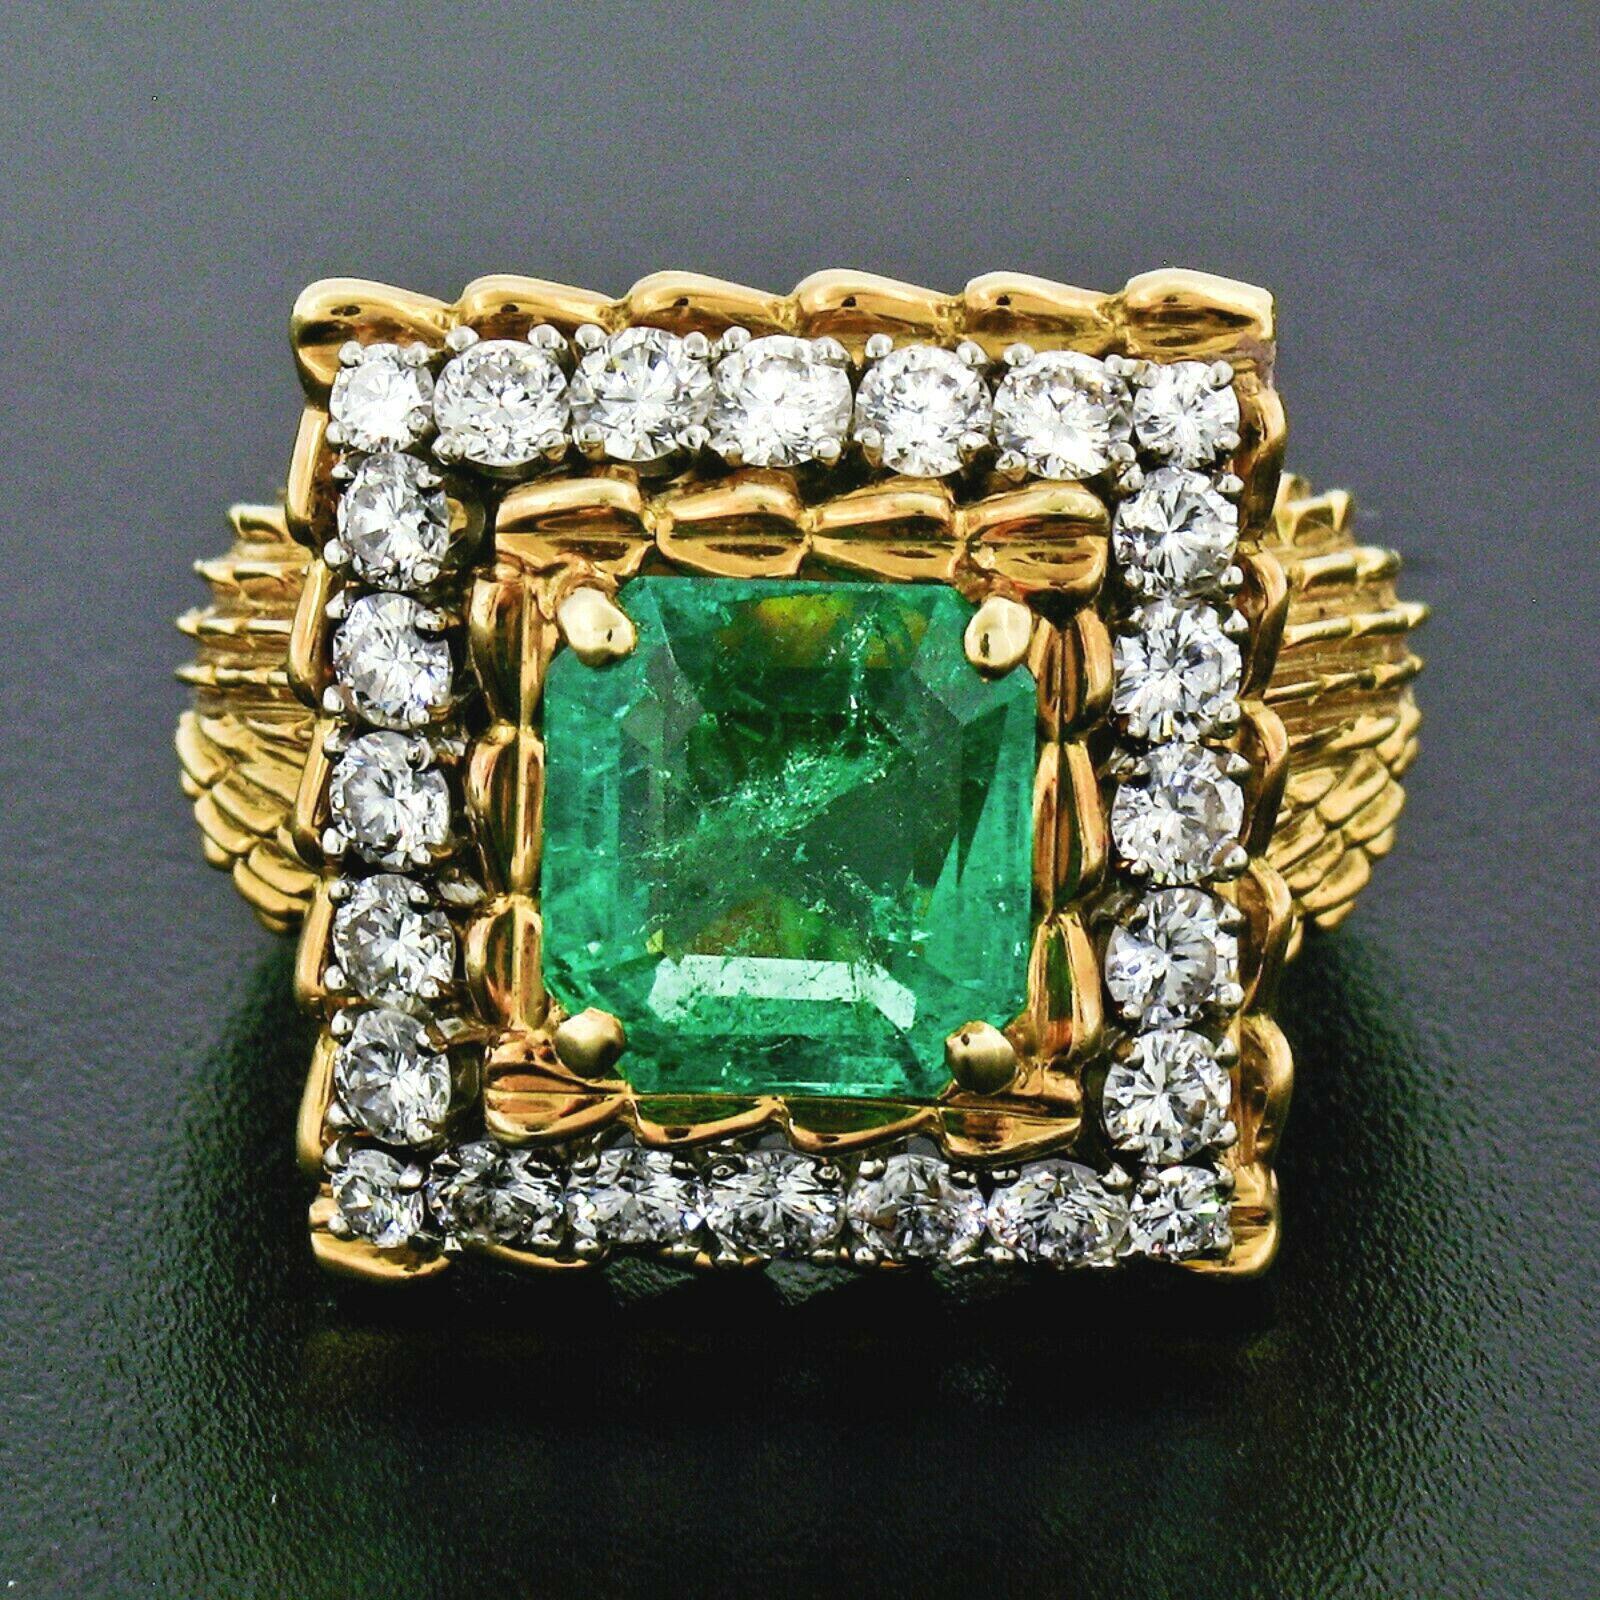 You are looking at a truly breathtaking, AGL certified, genuine emerald and diamond cocktail ring, very well crafted in solid 18k yellow gold. It features a large emerald cut Colombian emerald solitaire with the most desirable, rich, and lively